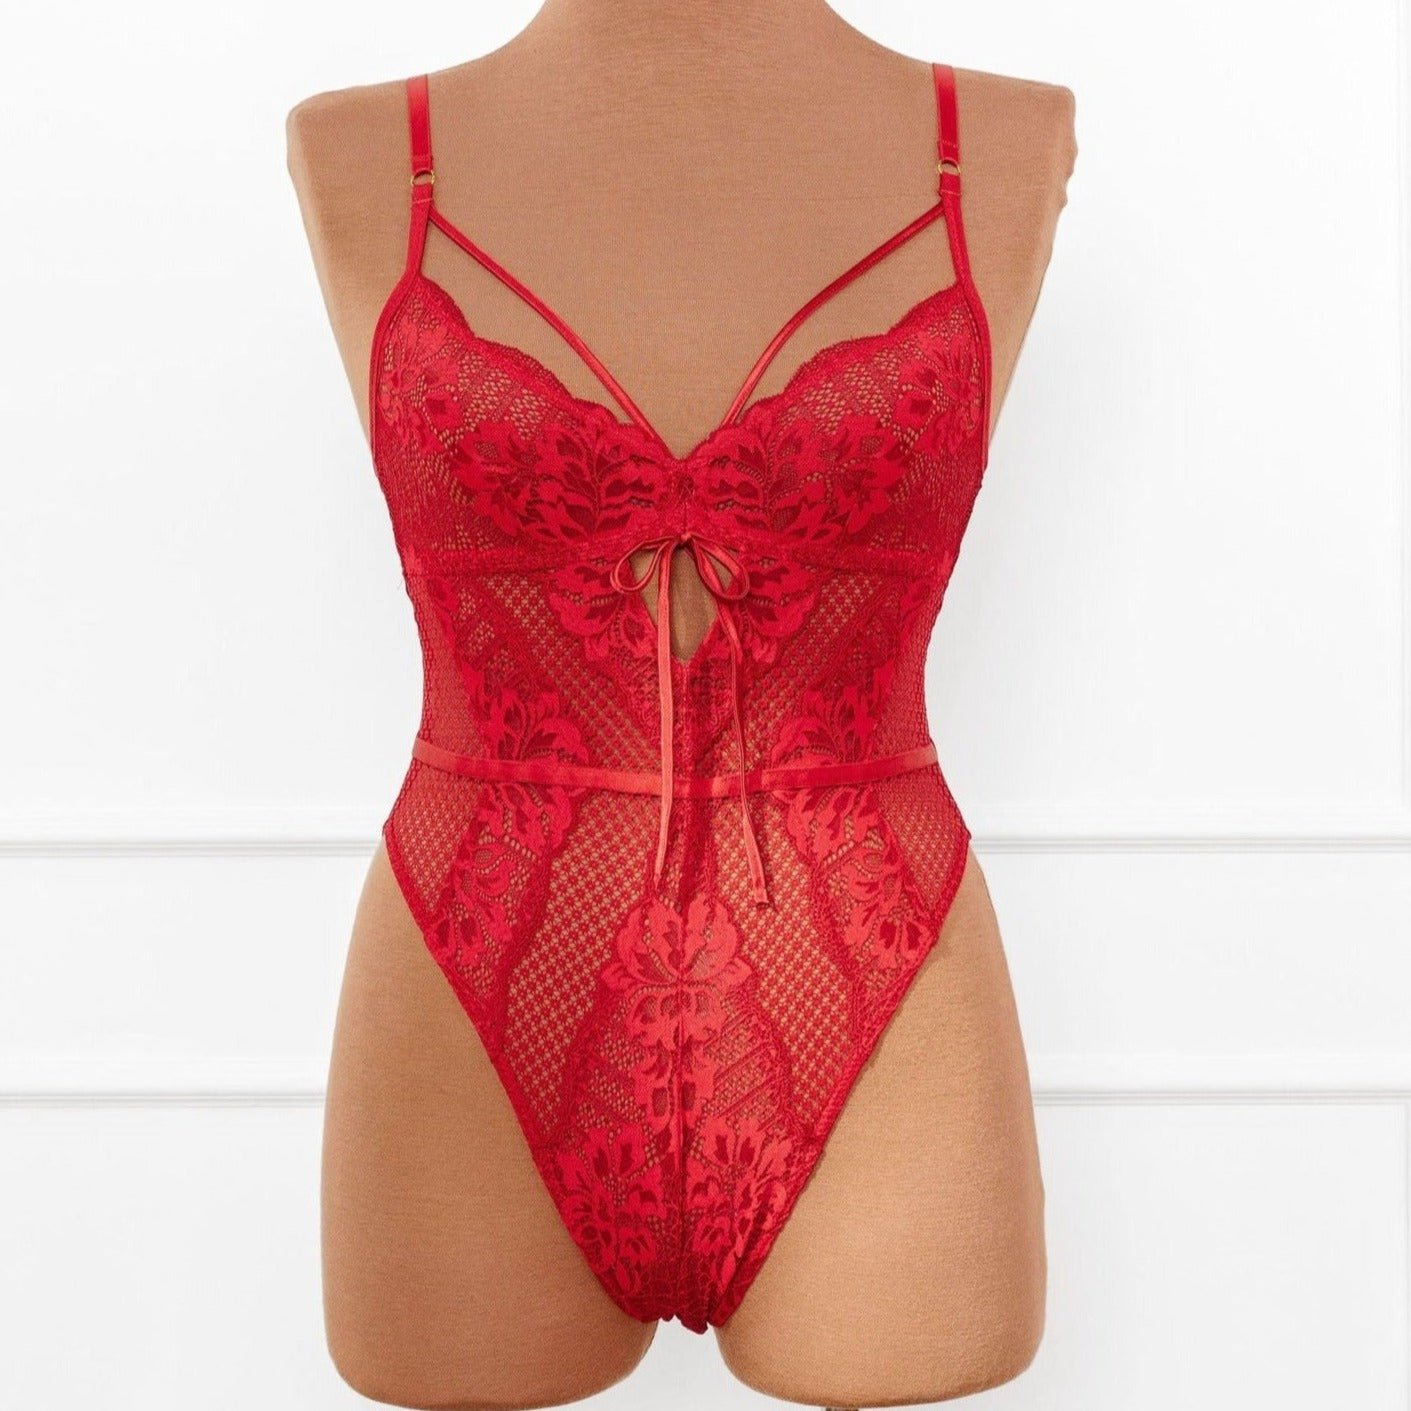 Lacy Caged Crotchless Teddy - Red by Mentionables